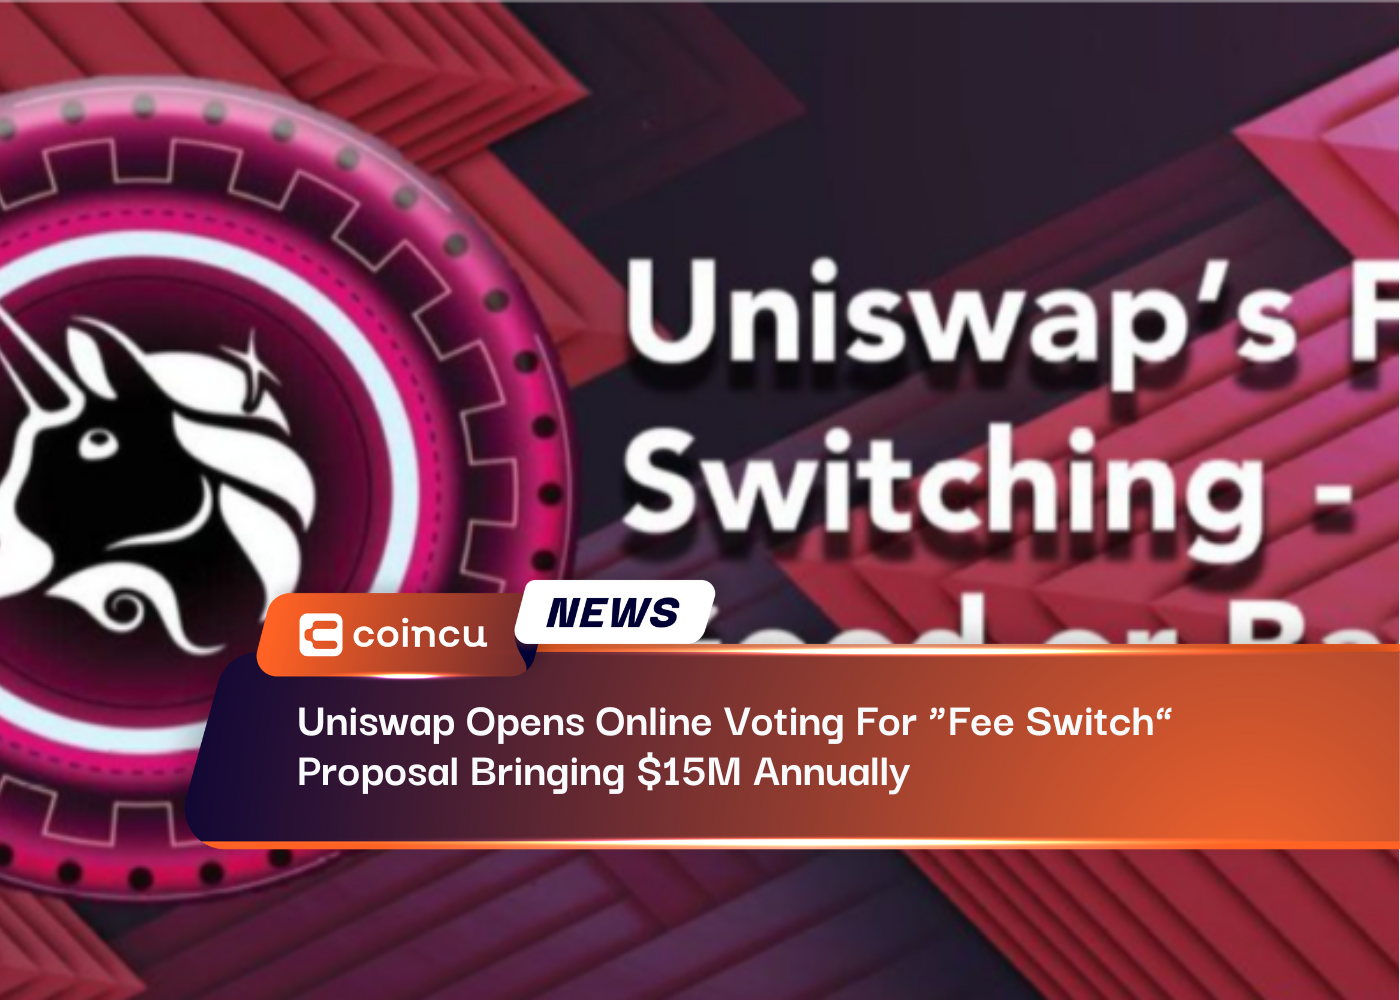 Uniswap Opens Online Voting For "Fee Switch" Proposal Bringing $15M Annually